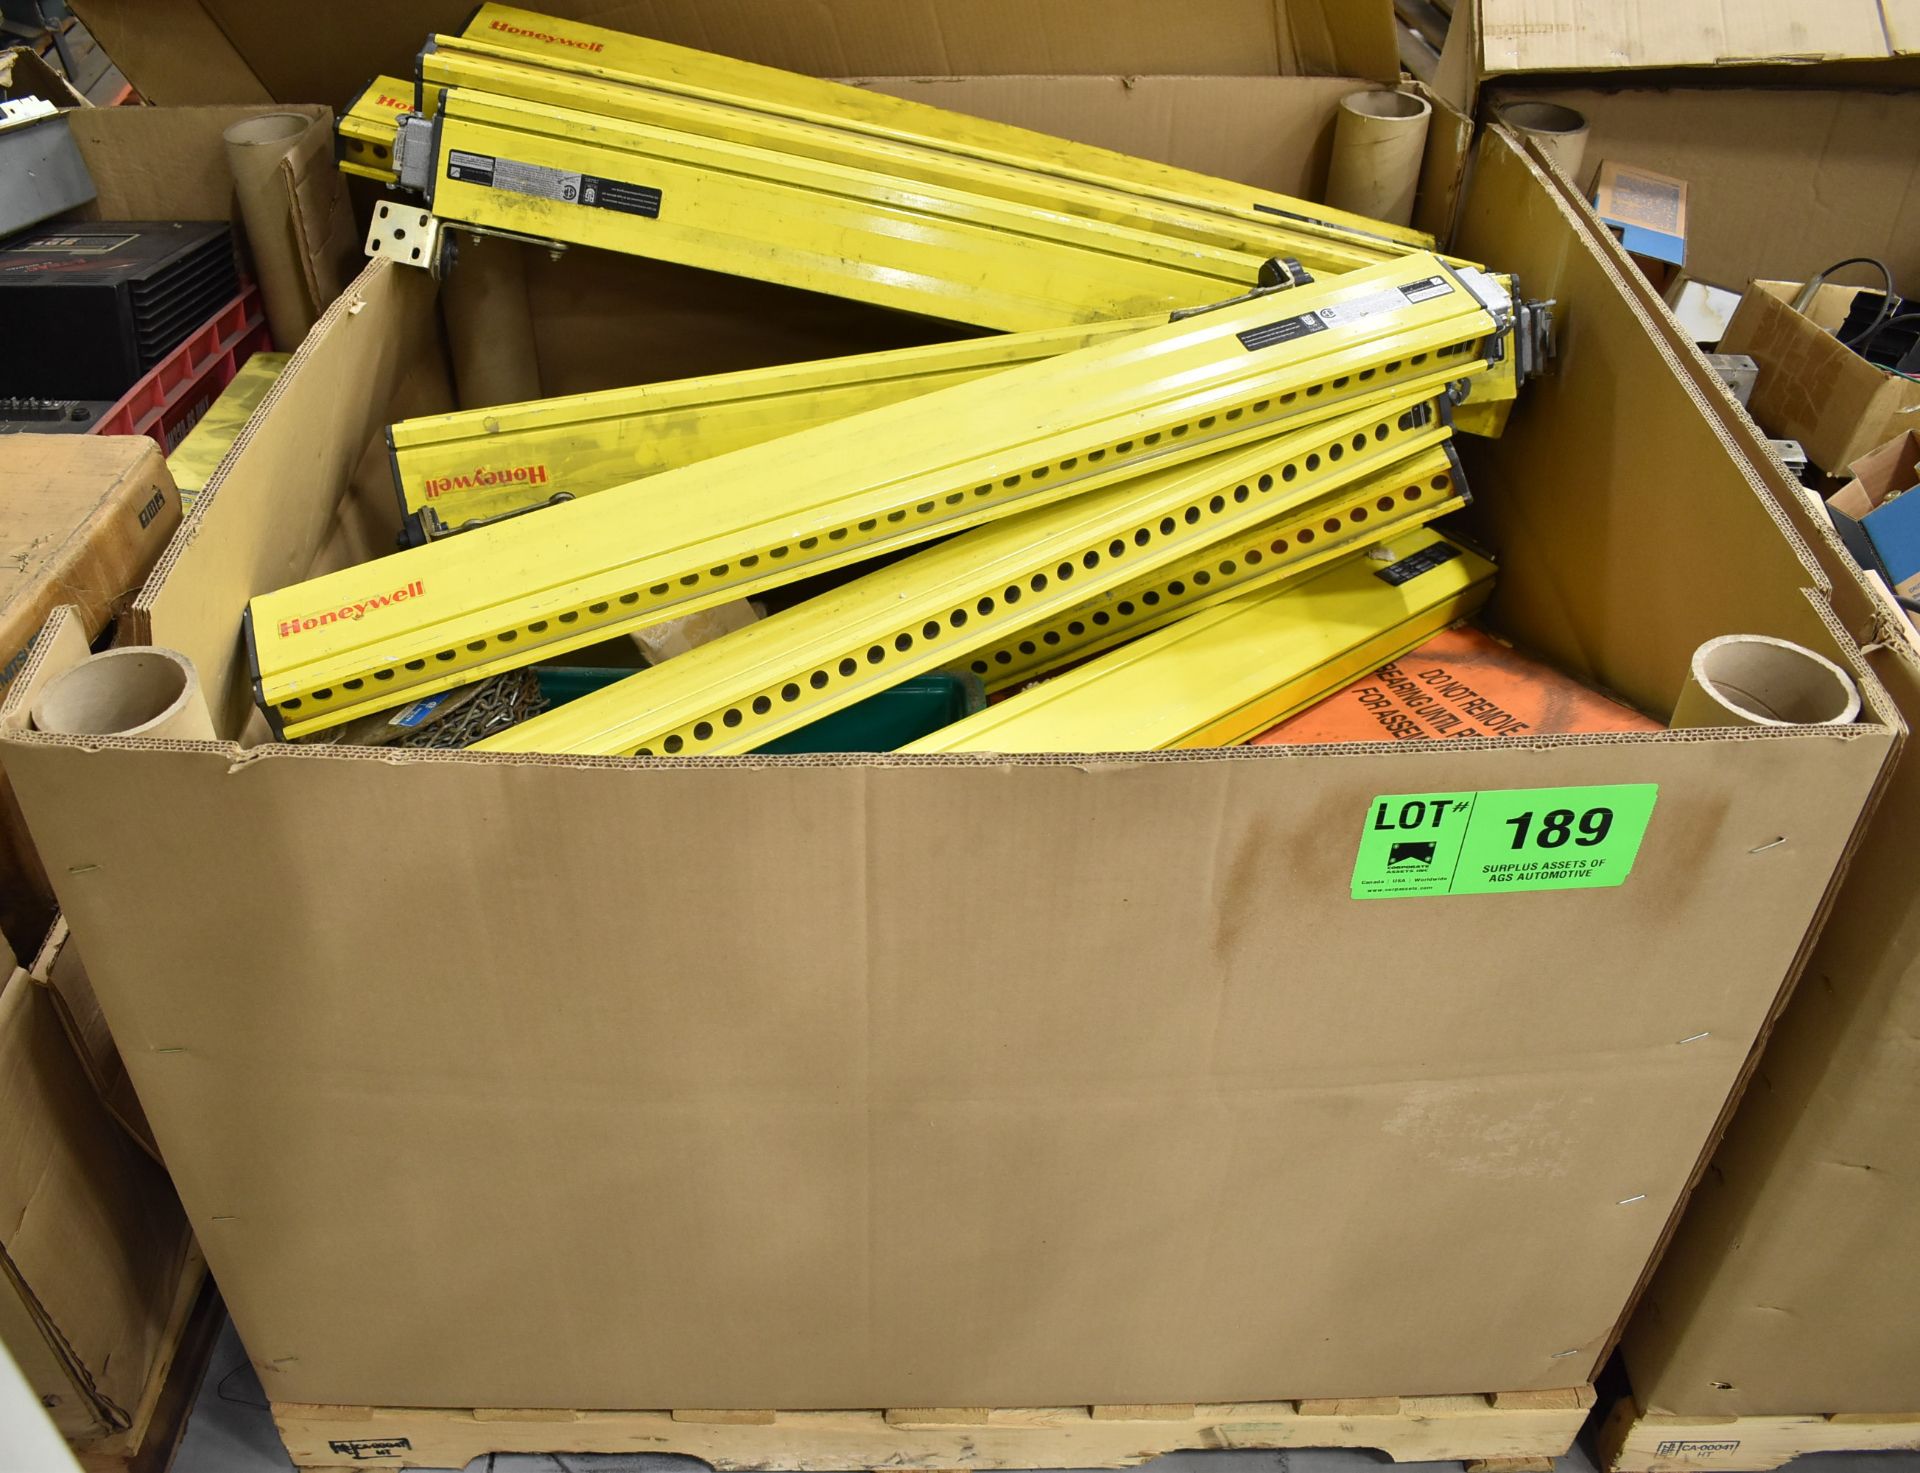 LOT/ GAYLORD WITH HONEYWELL SAFETY LIGHT CURTAINS, SPARE PARTS, MRO'S AND SHOP SUPPLIES (CI)